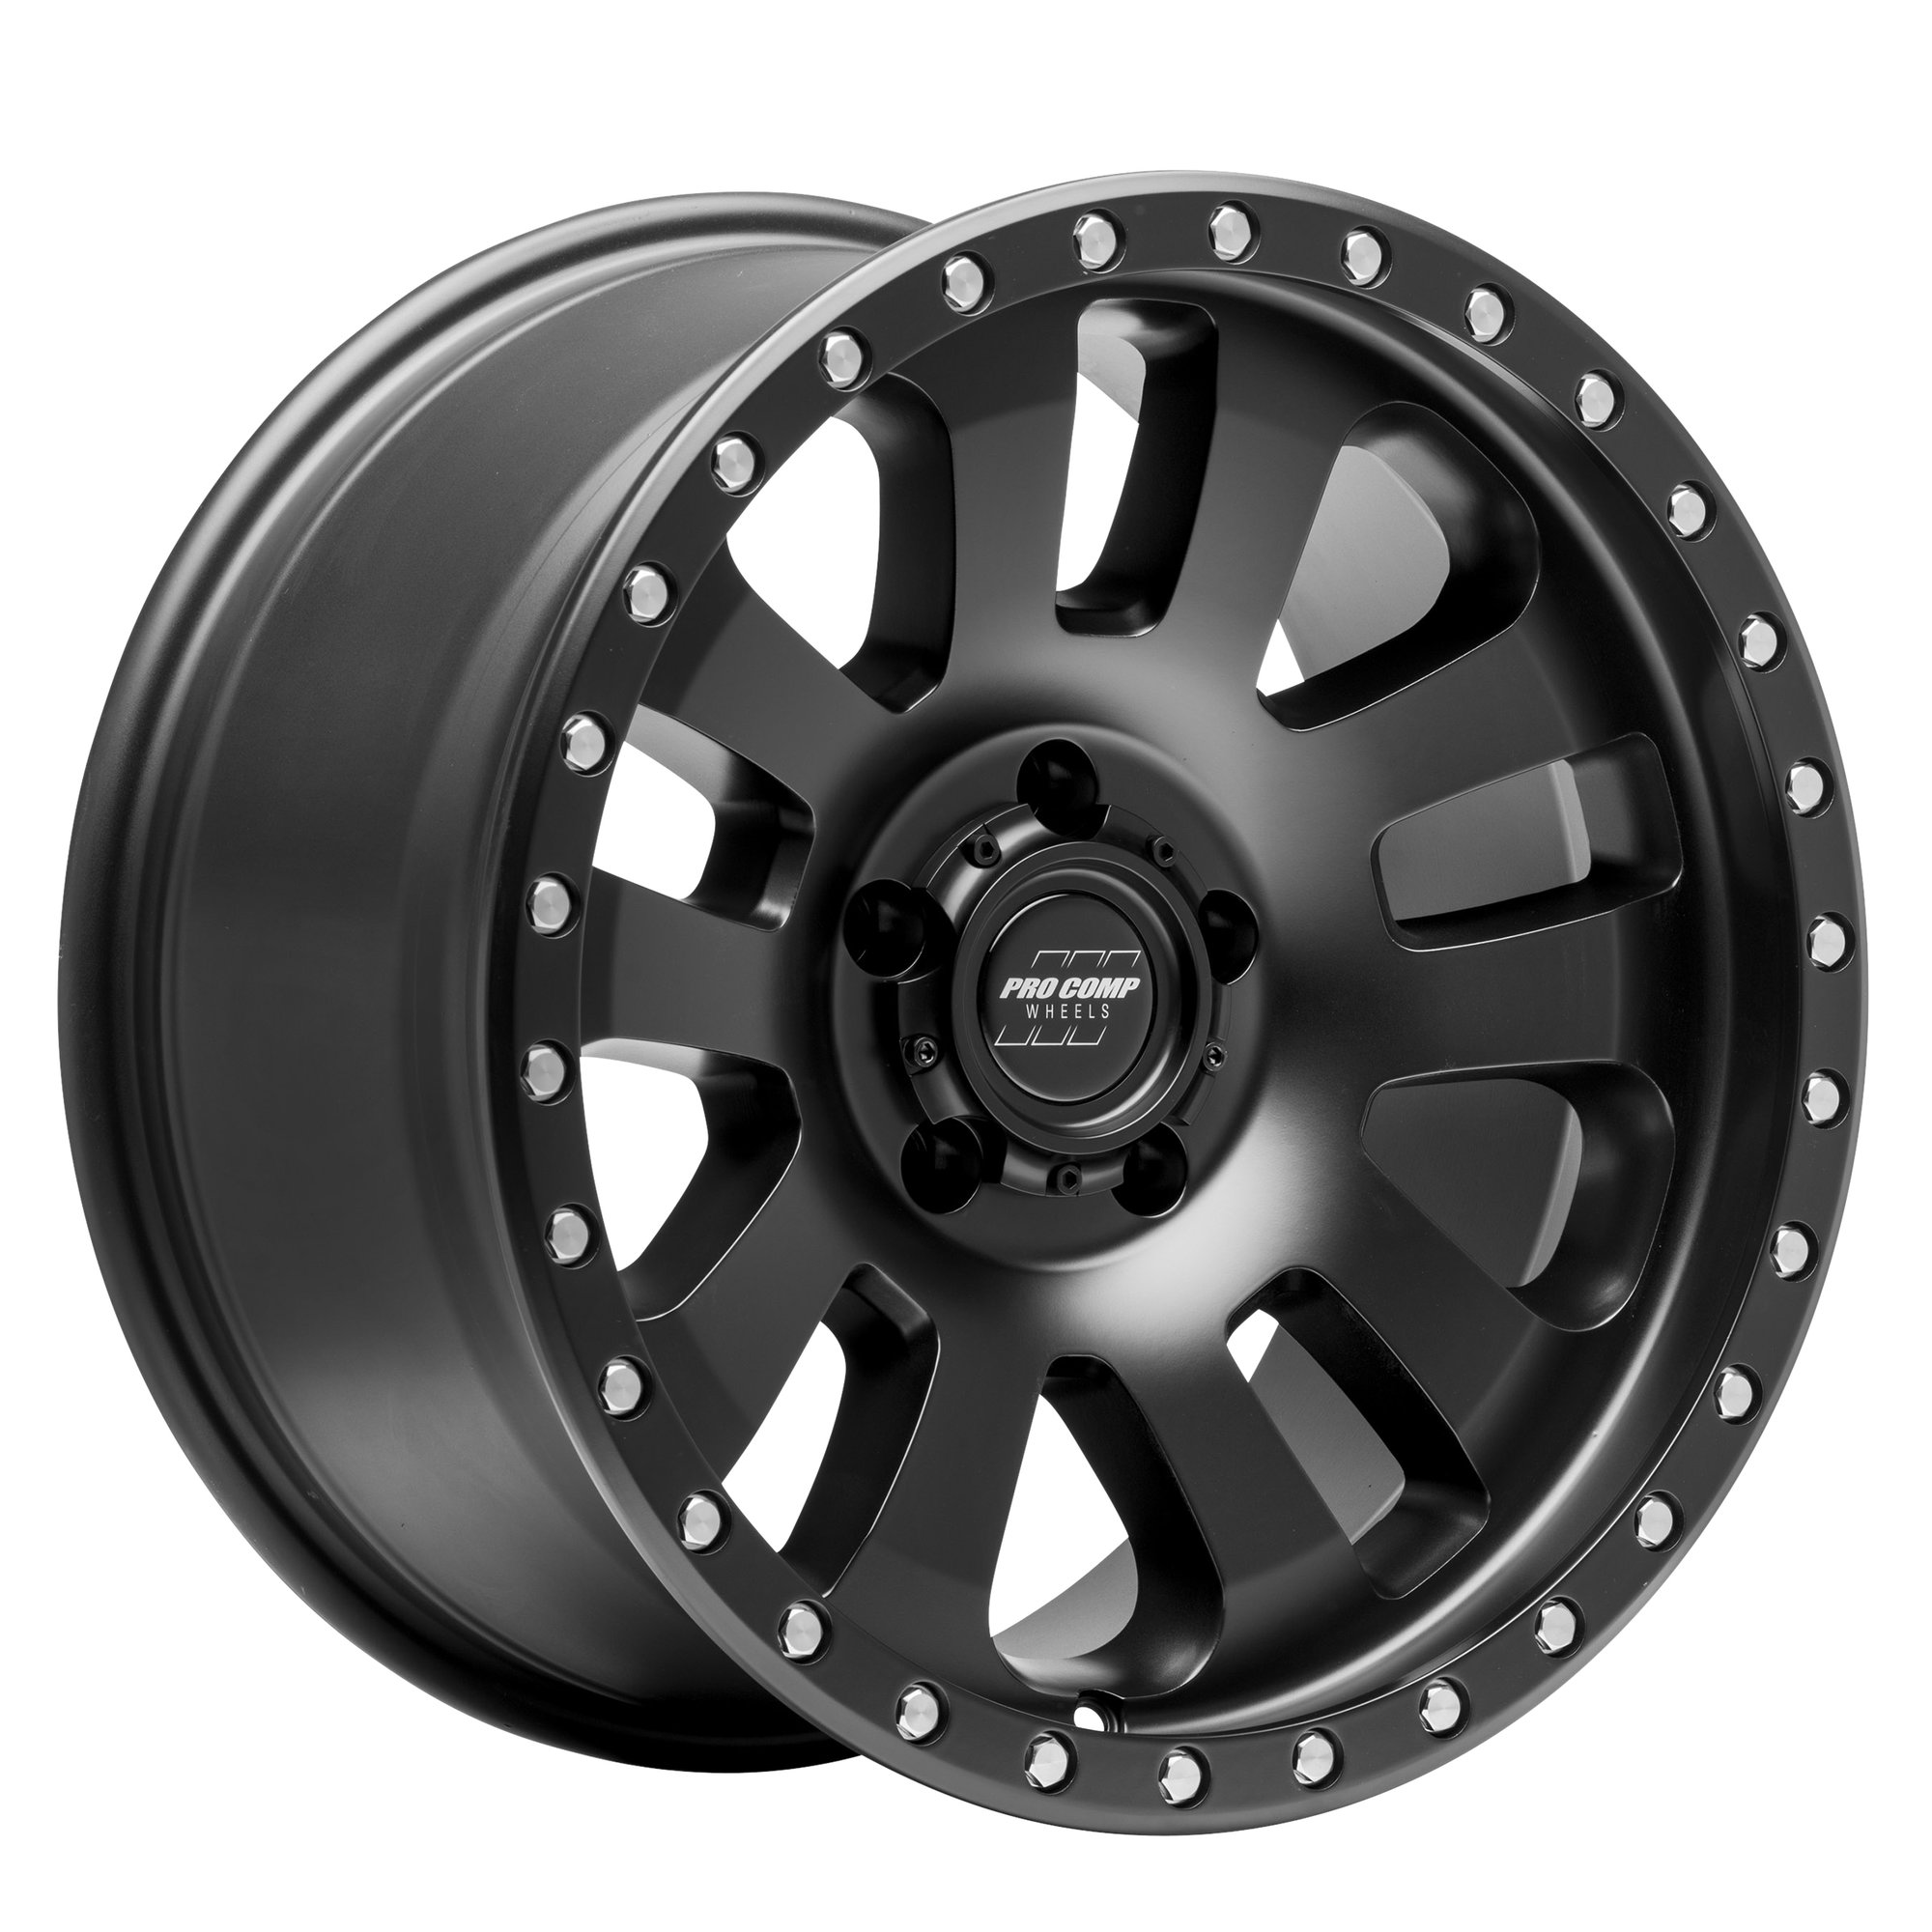 Pro Comp Prodigy Wheel in Satin Black for 07-18 Jeep Wrangler JK and 99